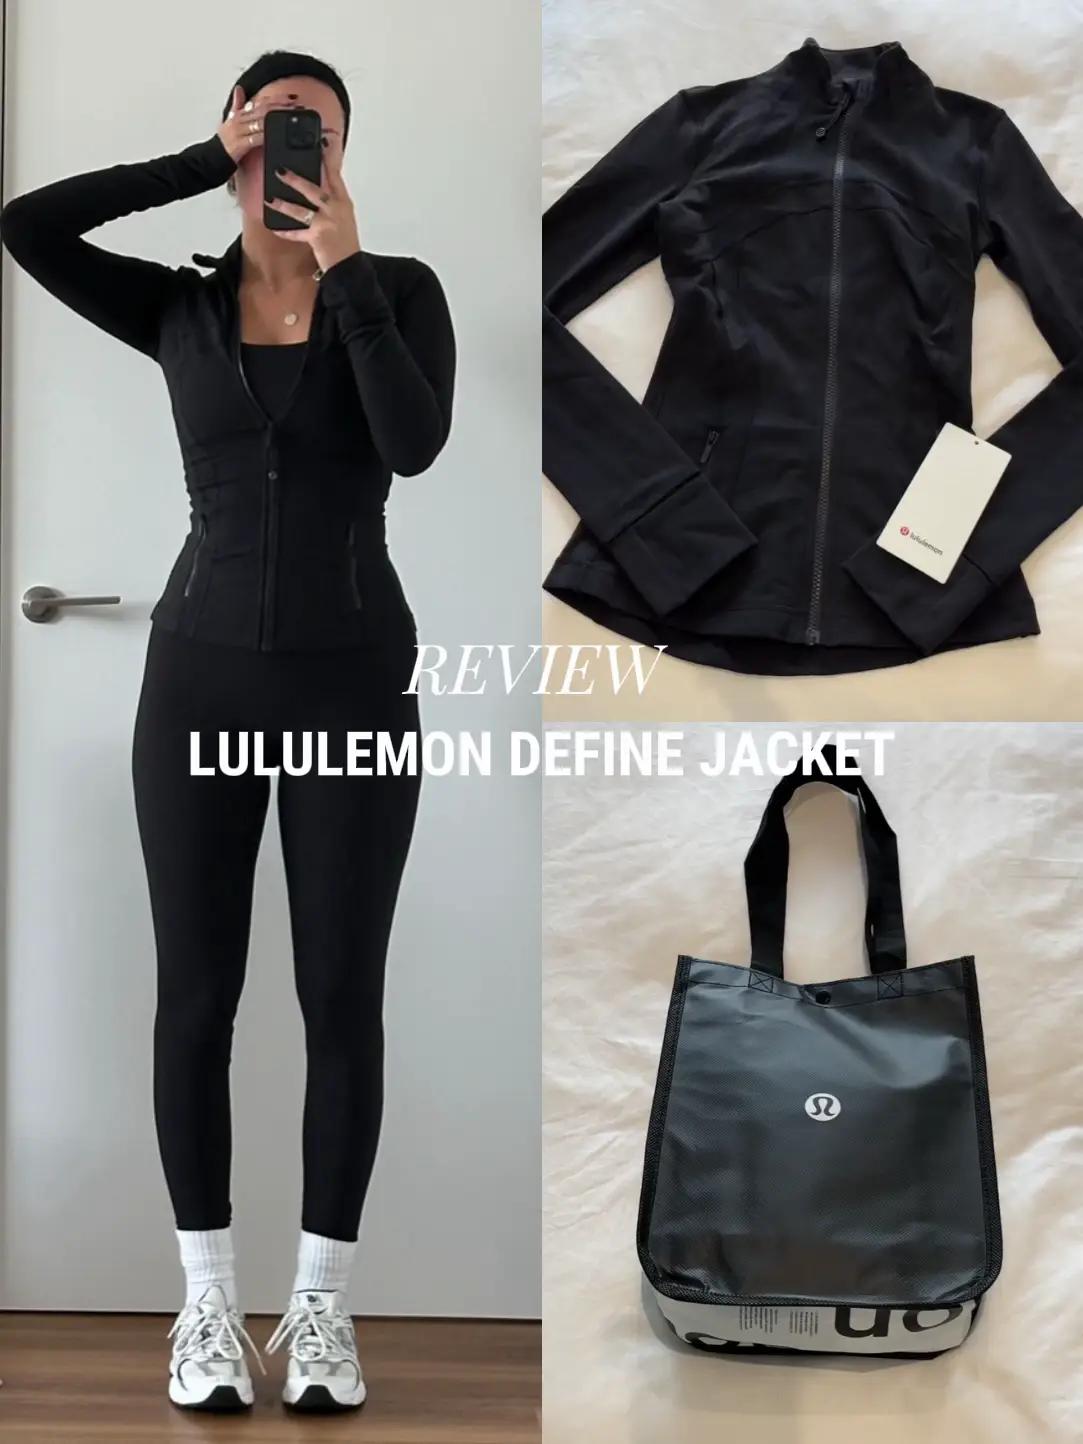 Define Jacket sizing review! Check first comment for my review💞🌷 : r/ lululemon